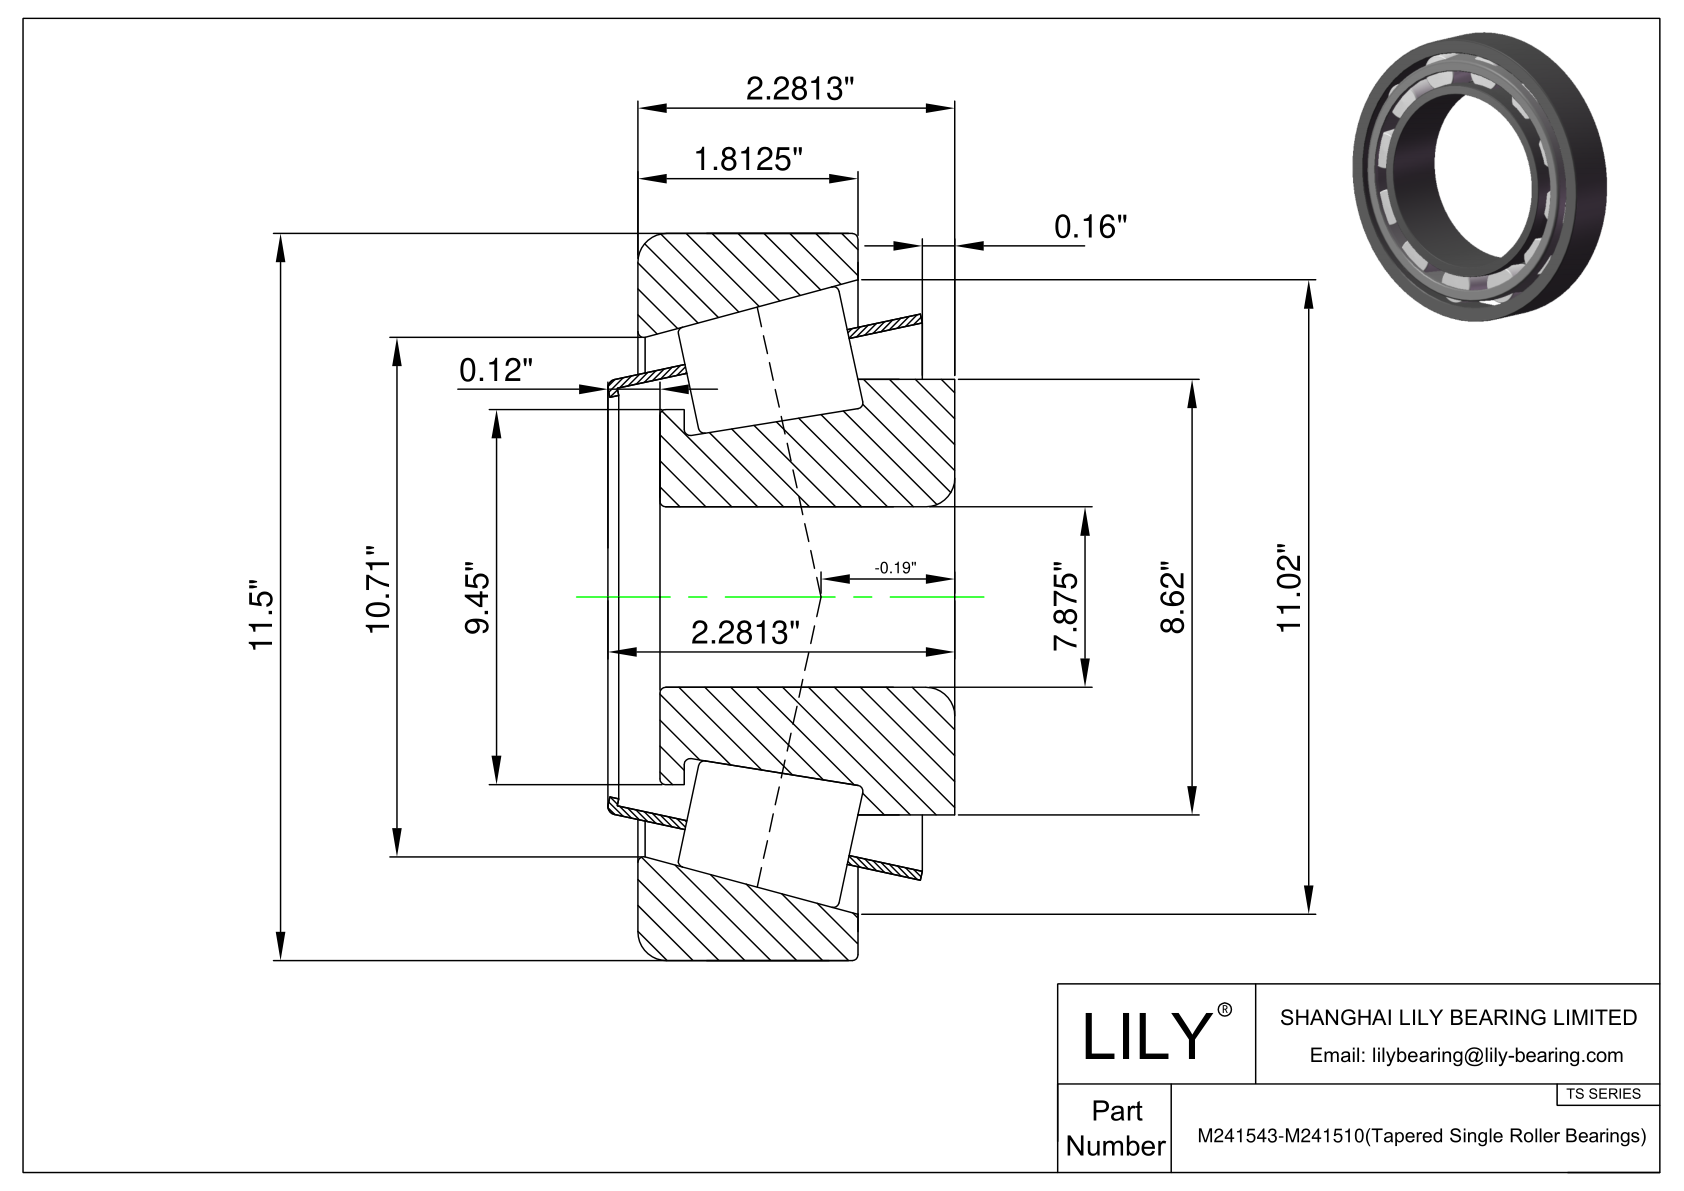 M241543-M241510 TS (Tapered Single Roller Bearings) (Imperial) cad drawing